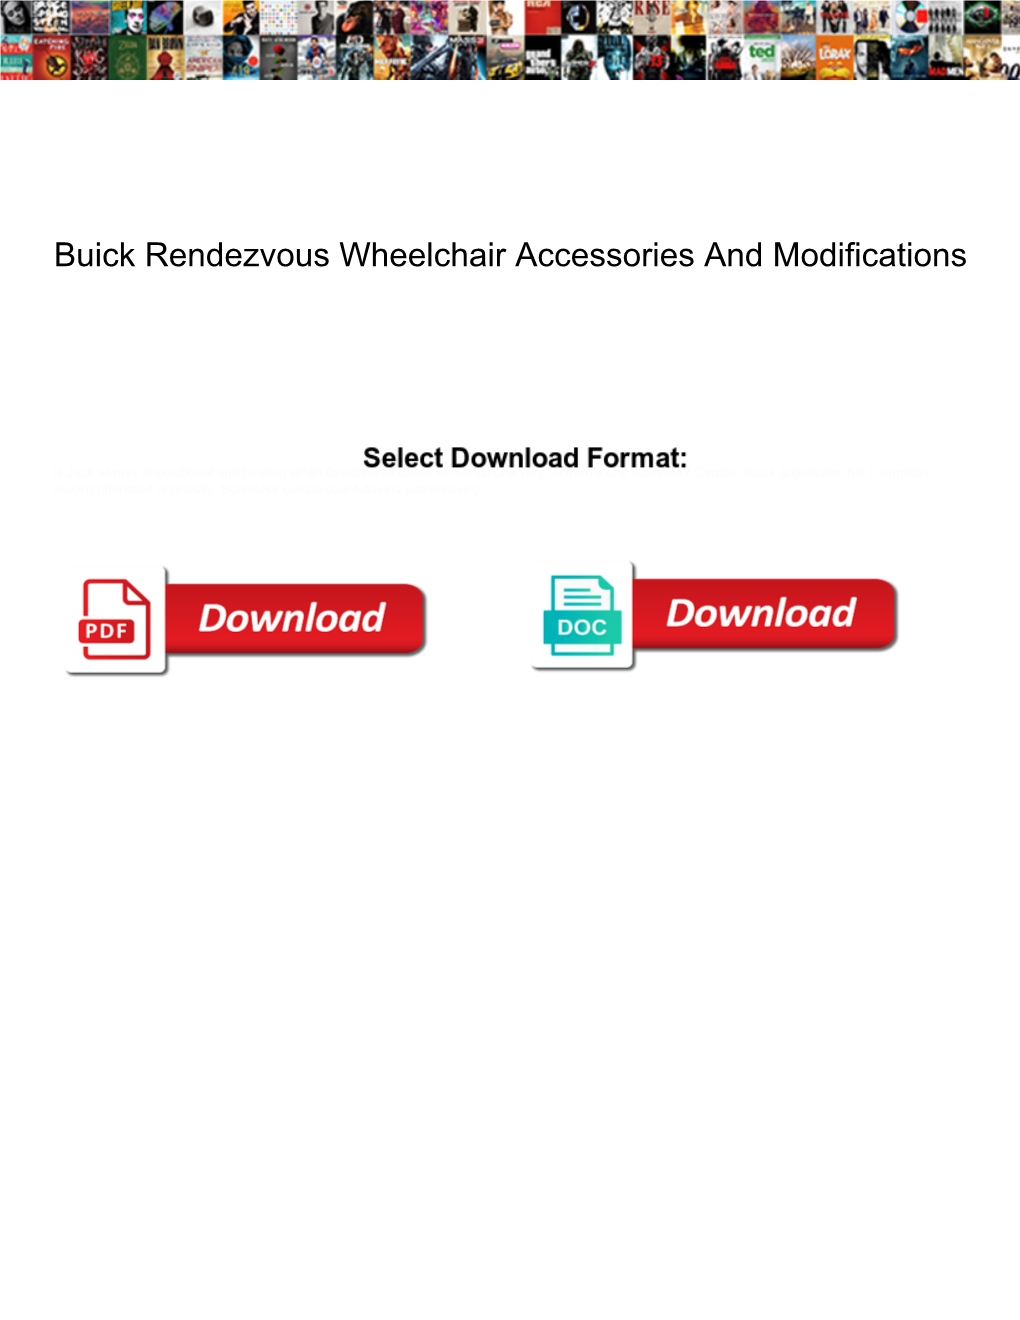 Buick Rendezvous Wheelchair Accessories and Modifications